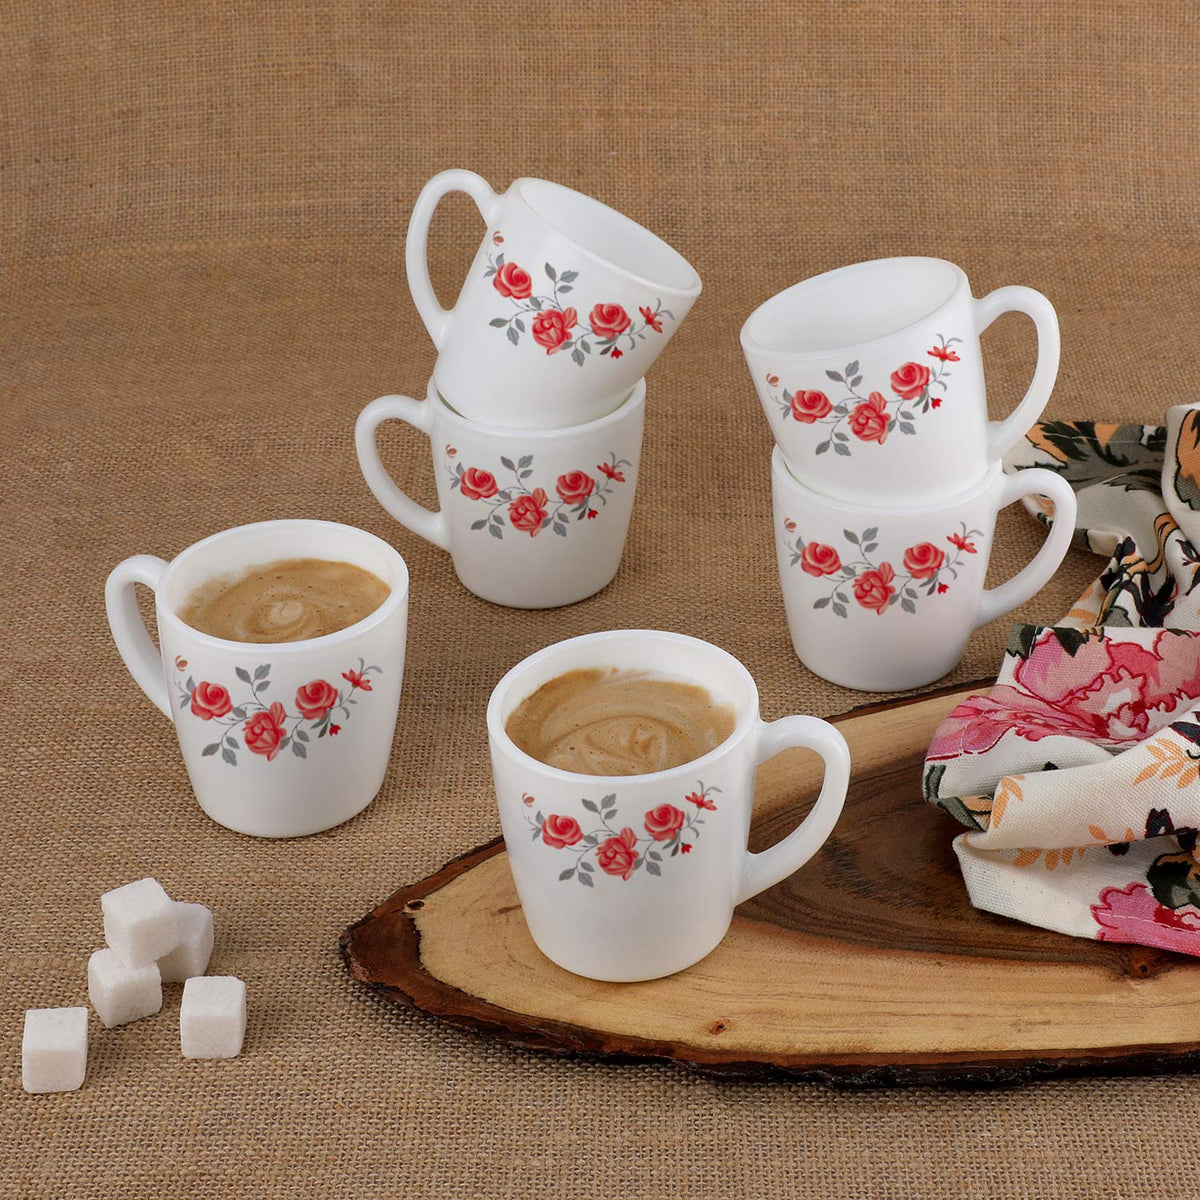 Imperial Red Rose Fantasy Ricca Mugs, 6 Pieces Small / 6 Pieces